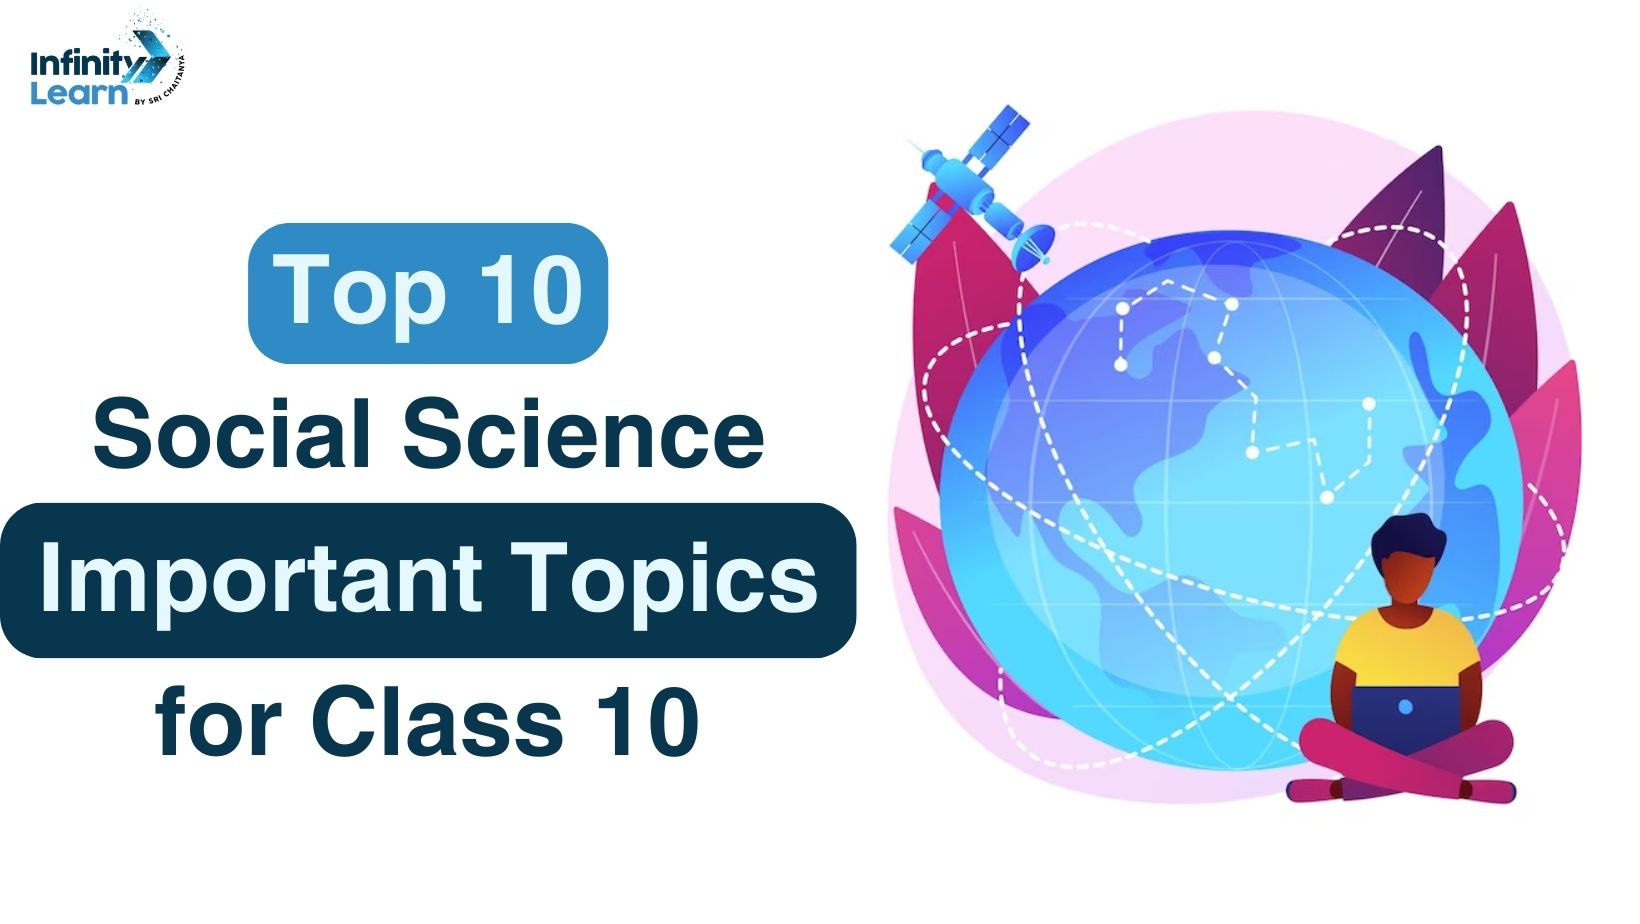 Top 10 Social Science Important Topics for Class 10